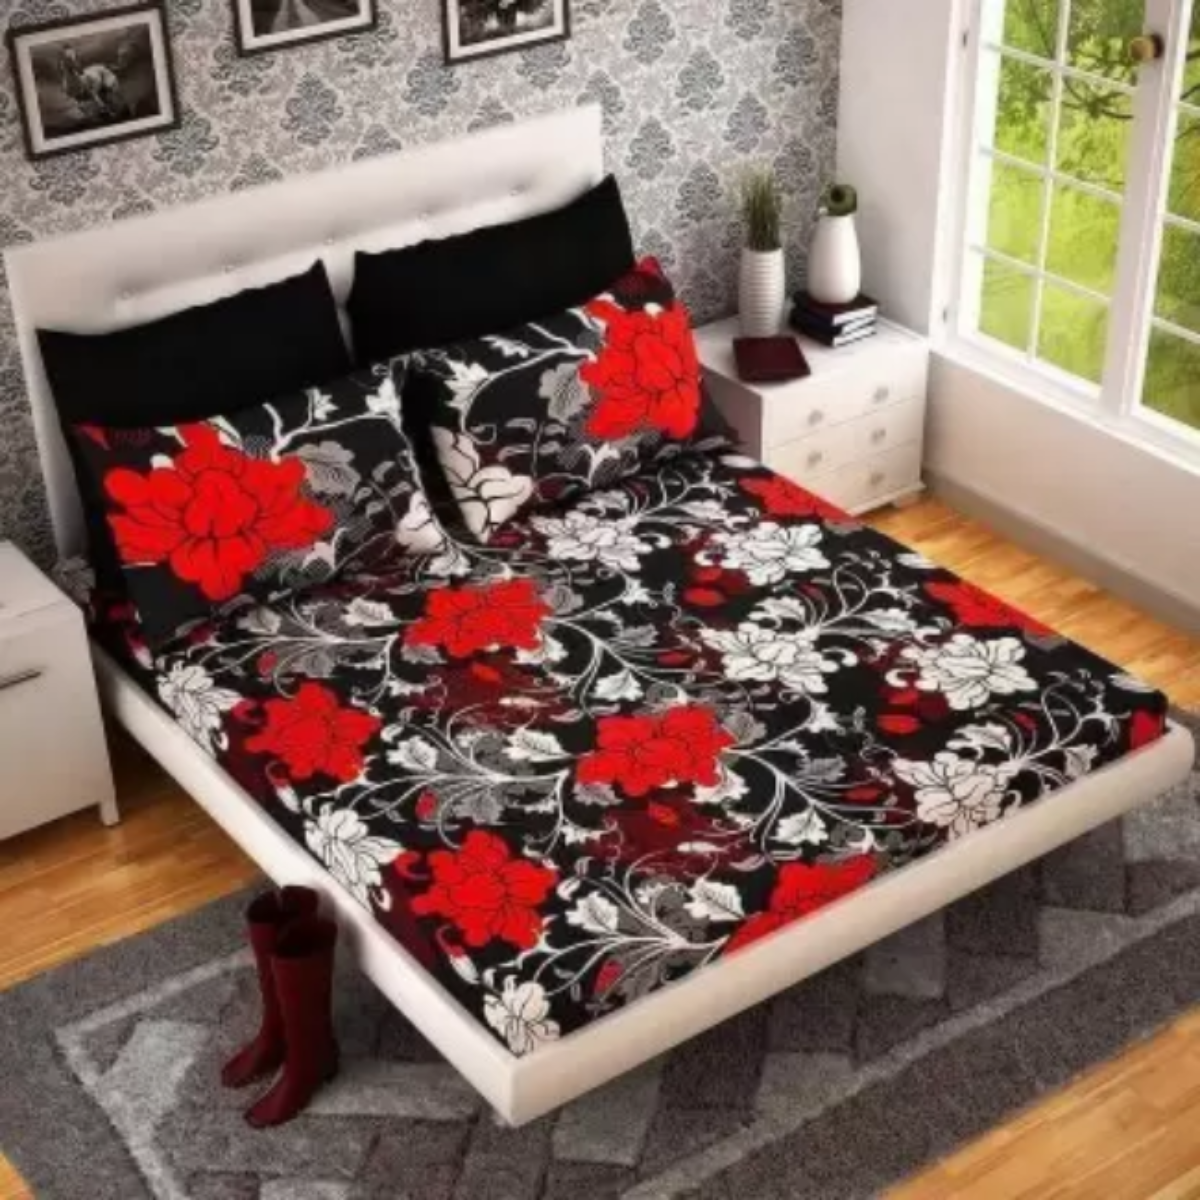 SPRINGSTONE POLYCOTTON DOUBLE PRINTED FLAT BEDSHEET ARTICLE NO HFDBSSD4M